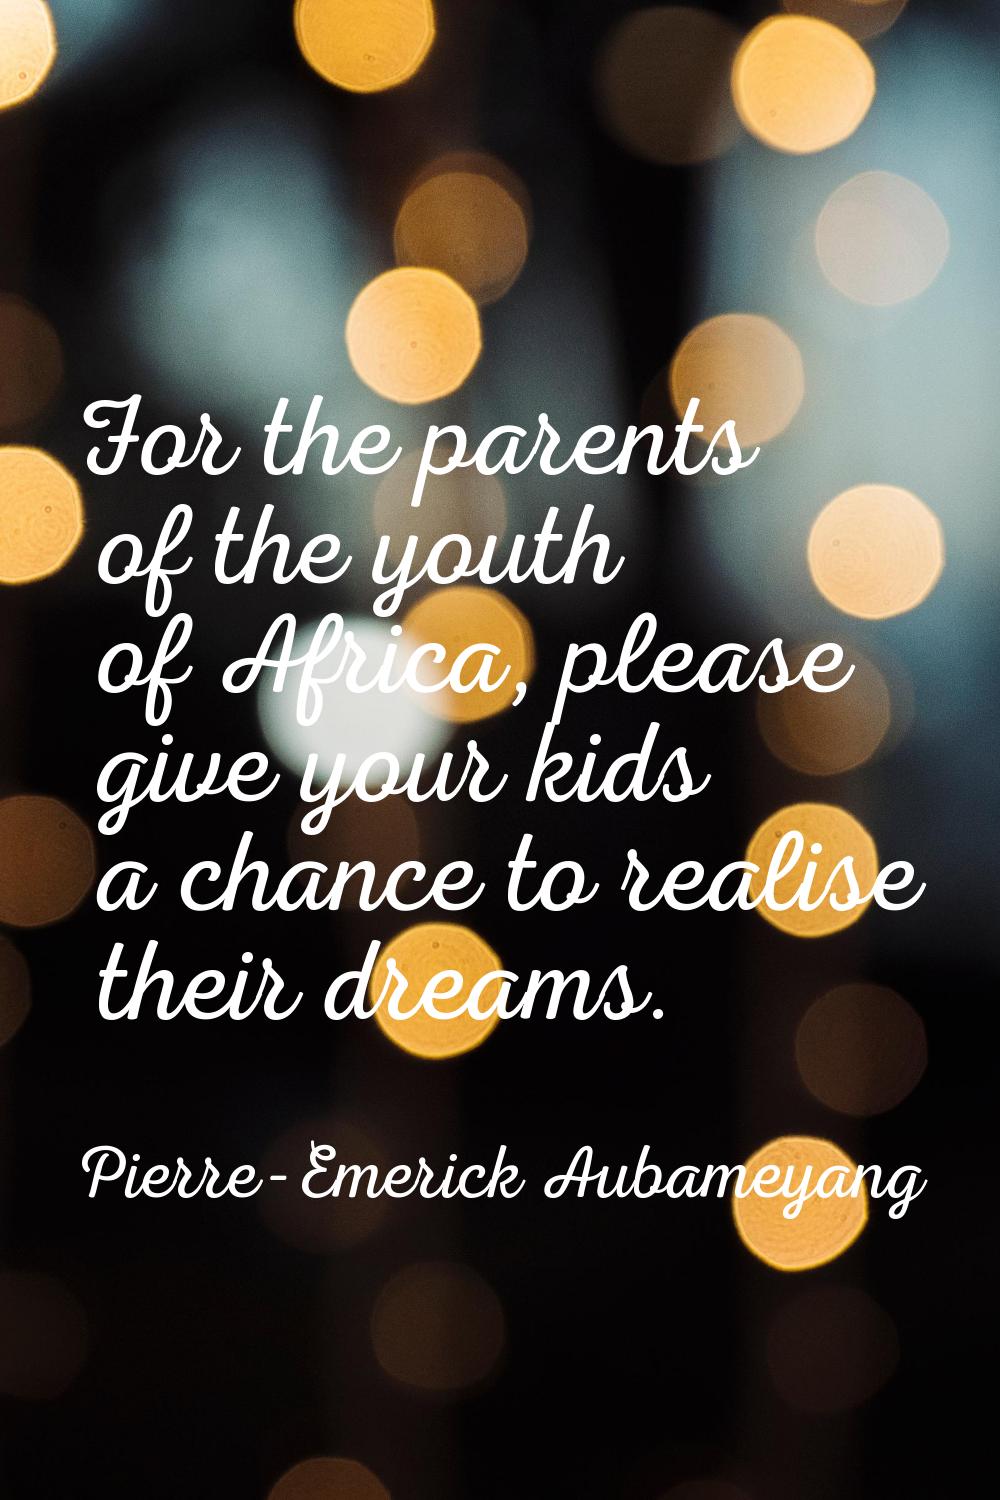 For the parents of the youth of Africa, please give your kids a chance to realise their dreams.